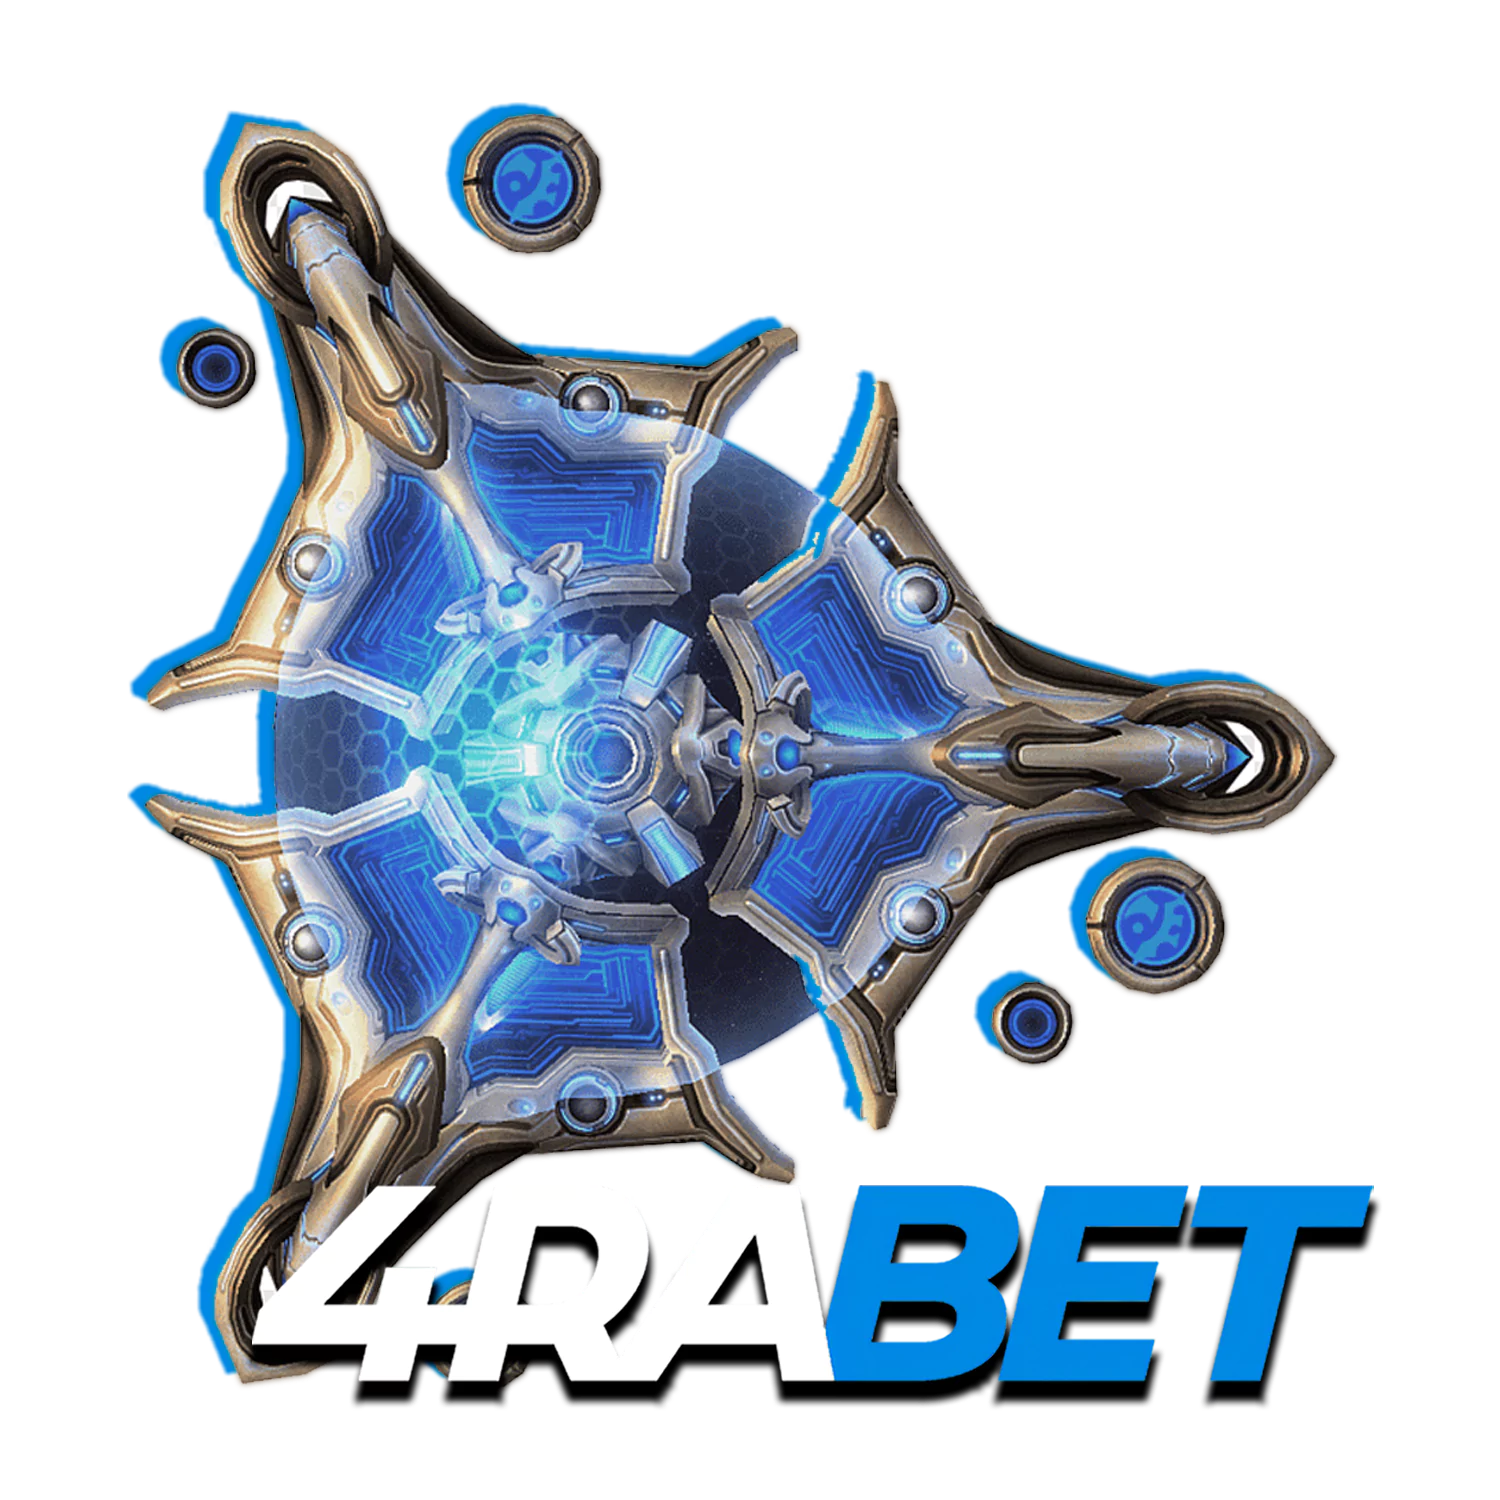 Learn how to get the welcome bonus and spend it on placing bets on the Starcraft 2 matches.